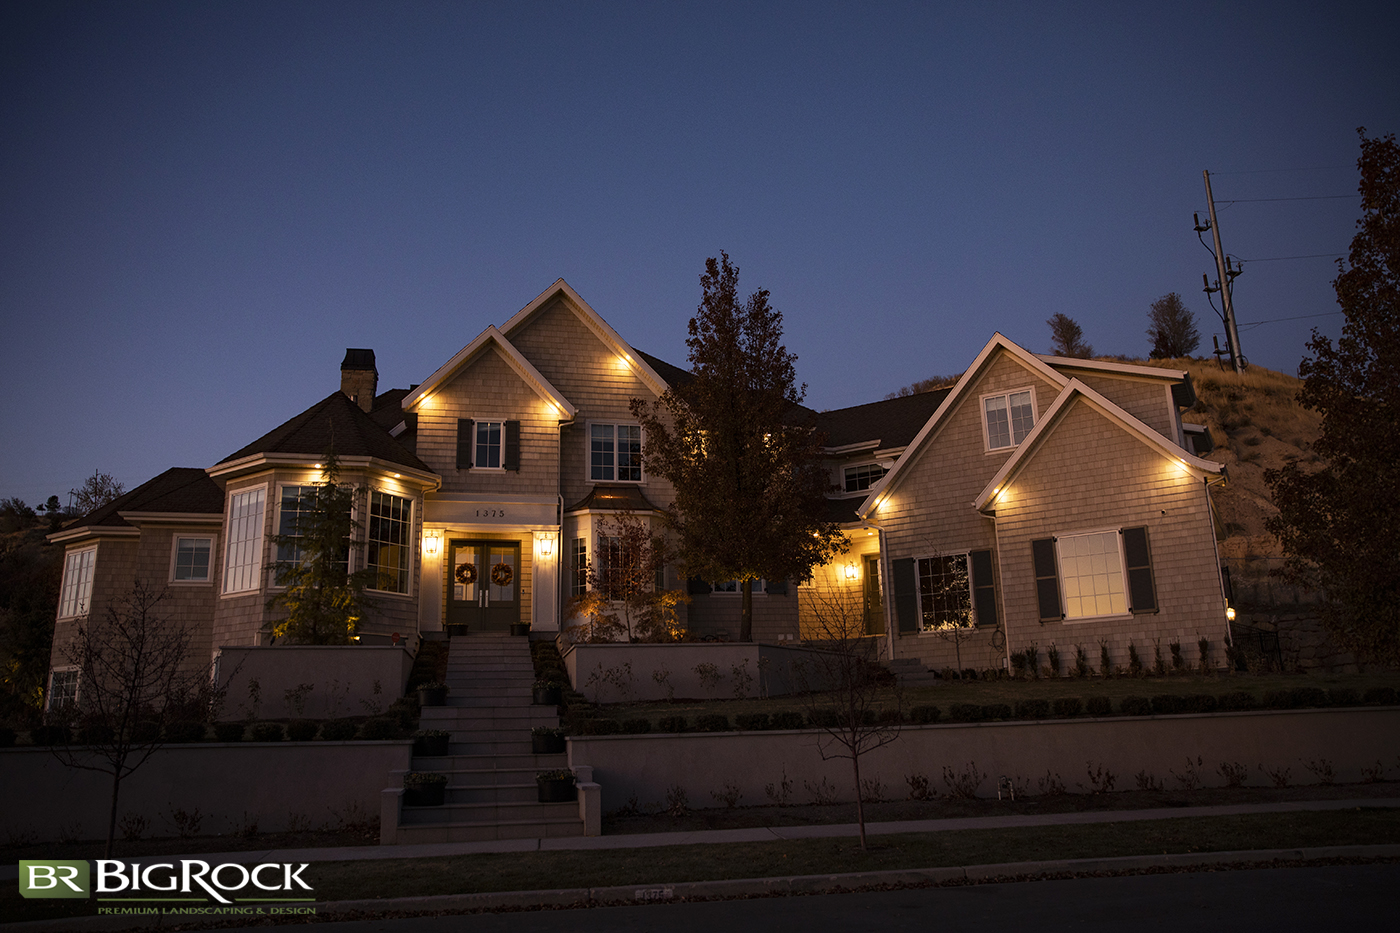 Landscapes aren't just for the daytime. Highlight landscapes or your beautiful home with thoughtfully designed landscape lighting.